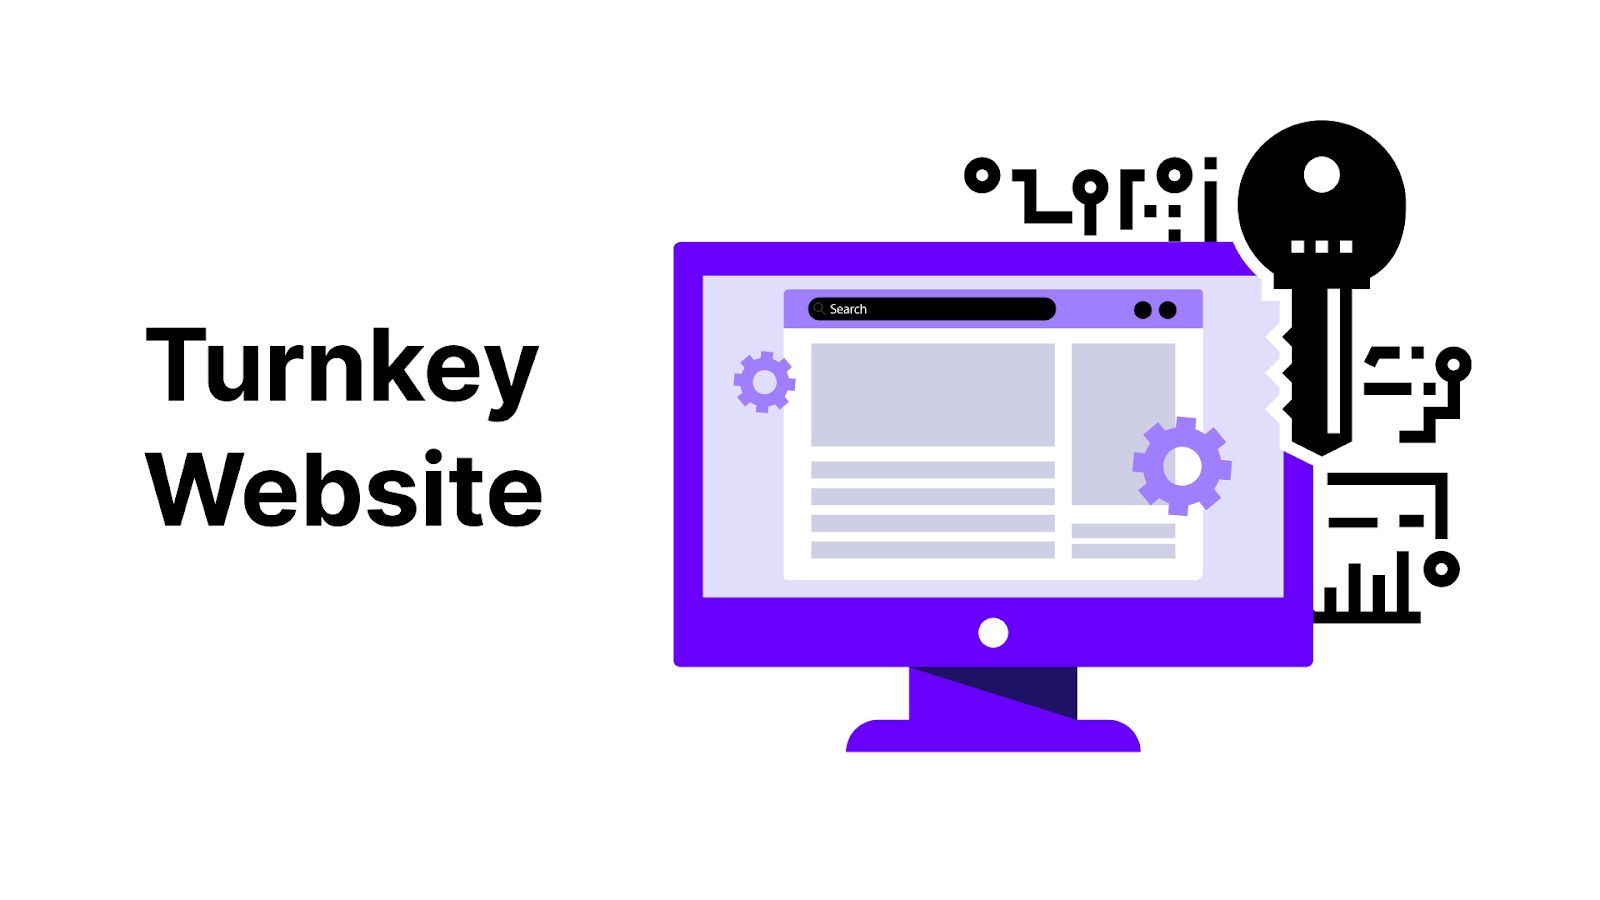 Creating turnkey websites is a potential recurring revenue option for your web agency.